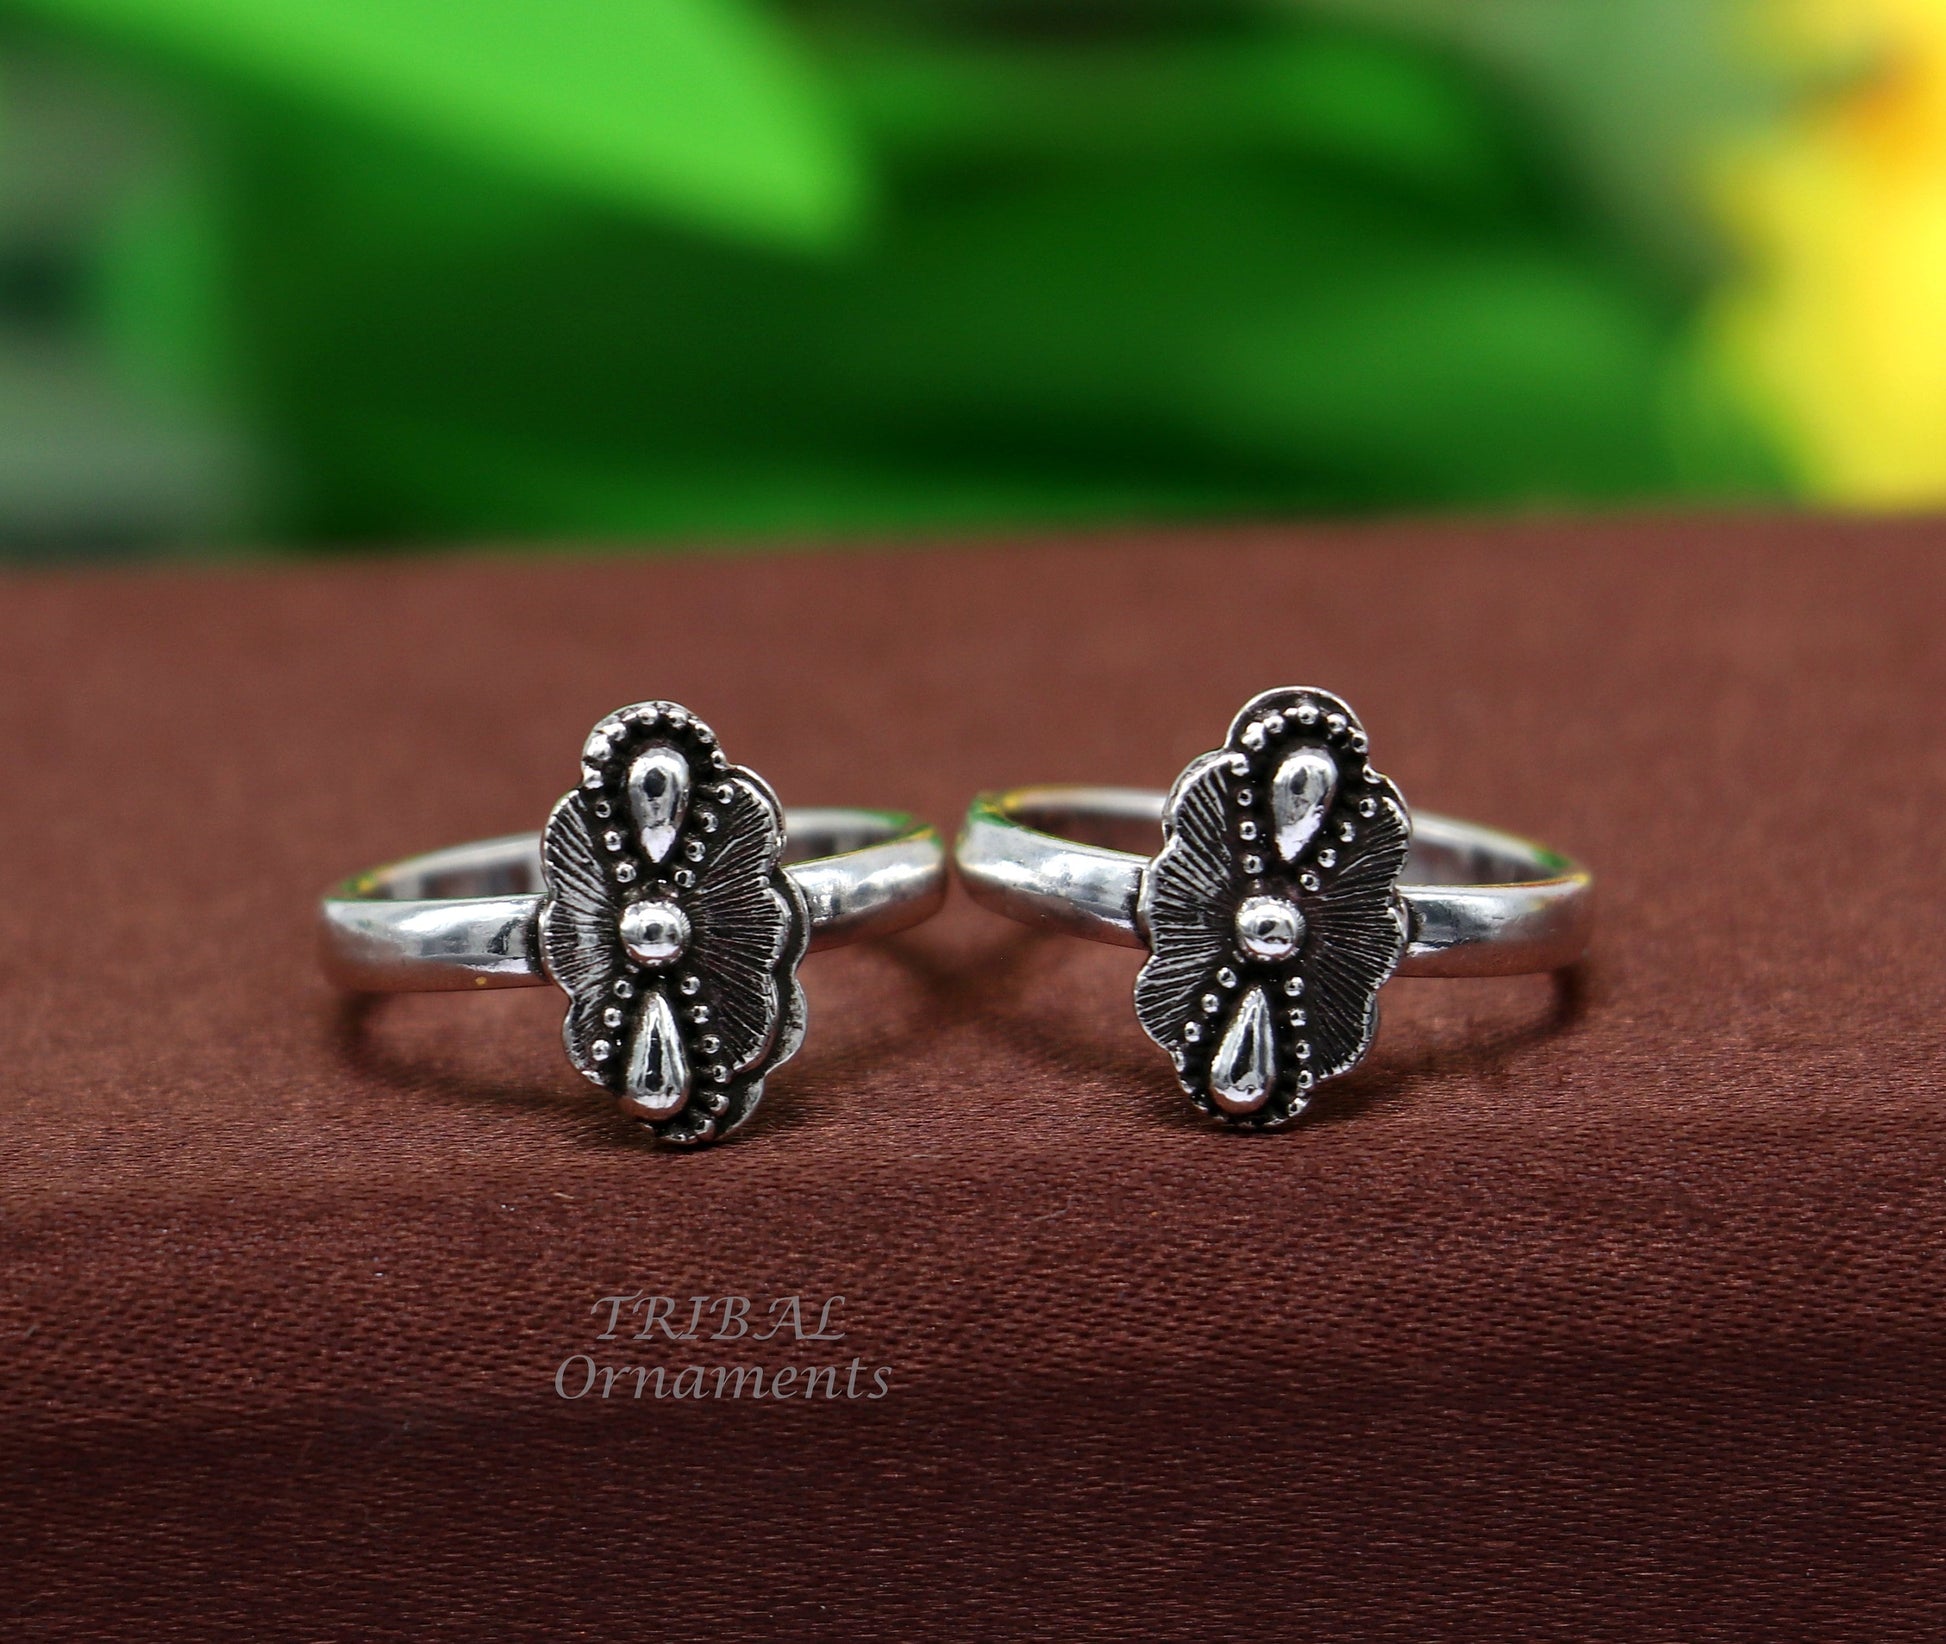 Amazing vintage design stylish 925 sterling silver brides gifting adjustable toe ring, best wedding gift or daily use ethnic jewelry ytr56 - TRIBAL ORNAMENTS